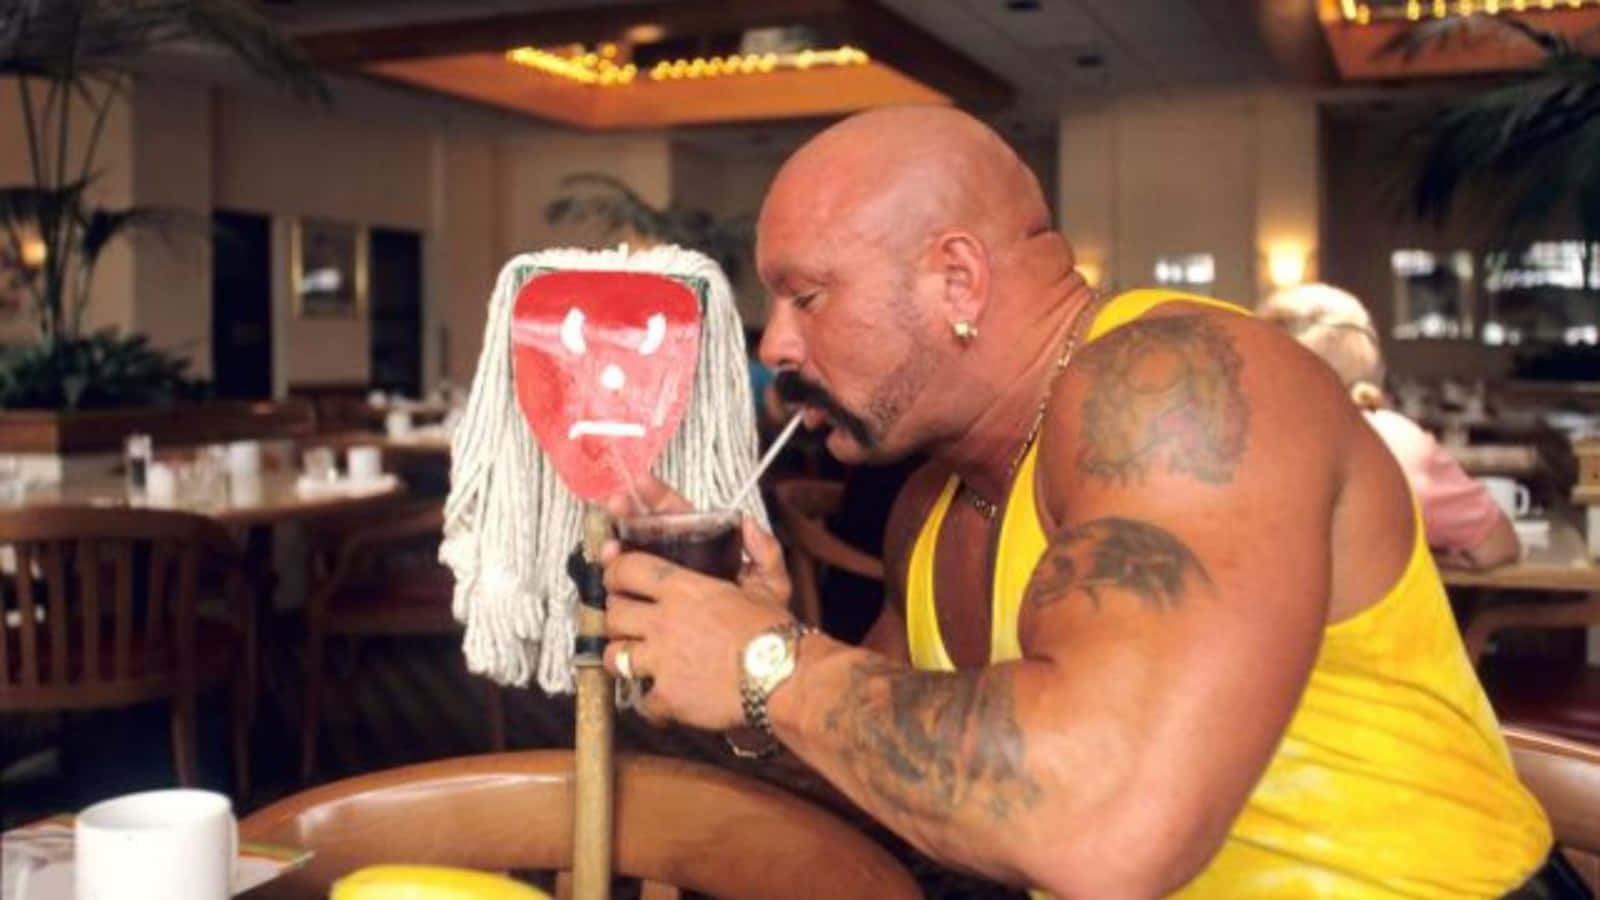 Perrysaturn Med Moppy. (this Would Be The Phrase For A Computer Or Mobile Wallpaper Featuring Perry Saturn And His Pet Mop, Moppy.) Wallpaper